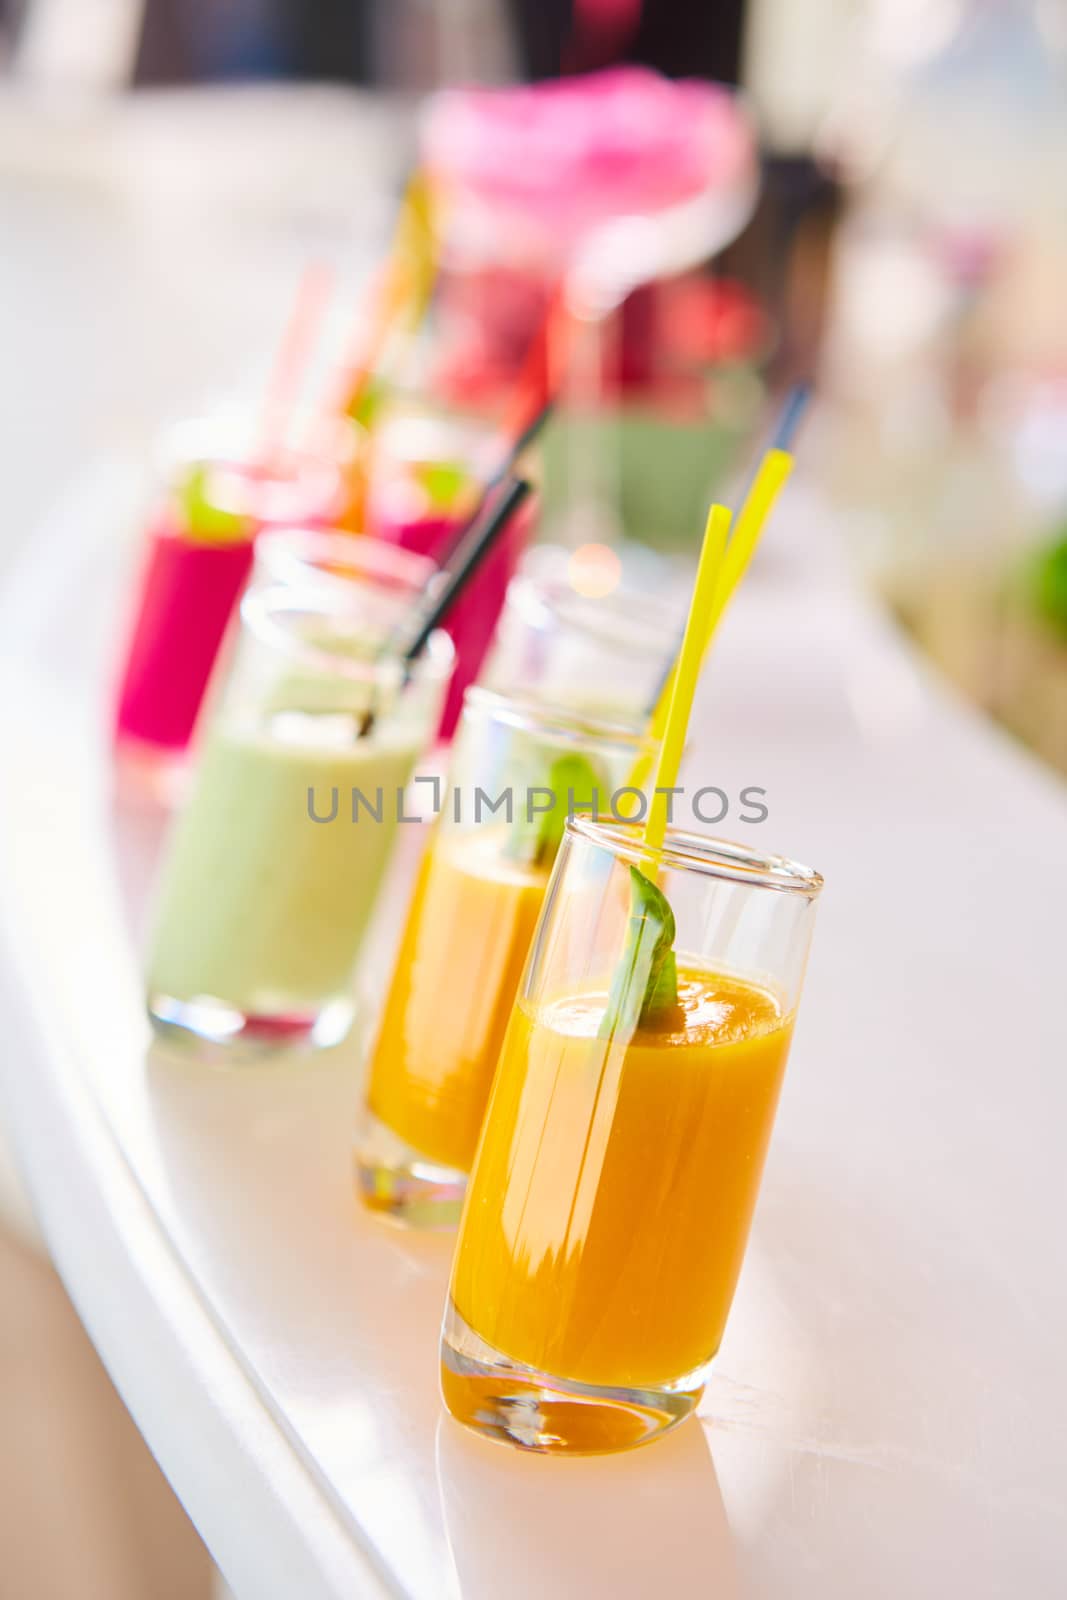 Set of different vegetable juices on the bar. The concept of healthy food